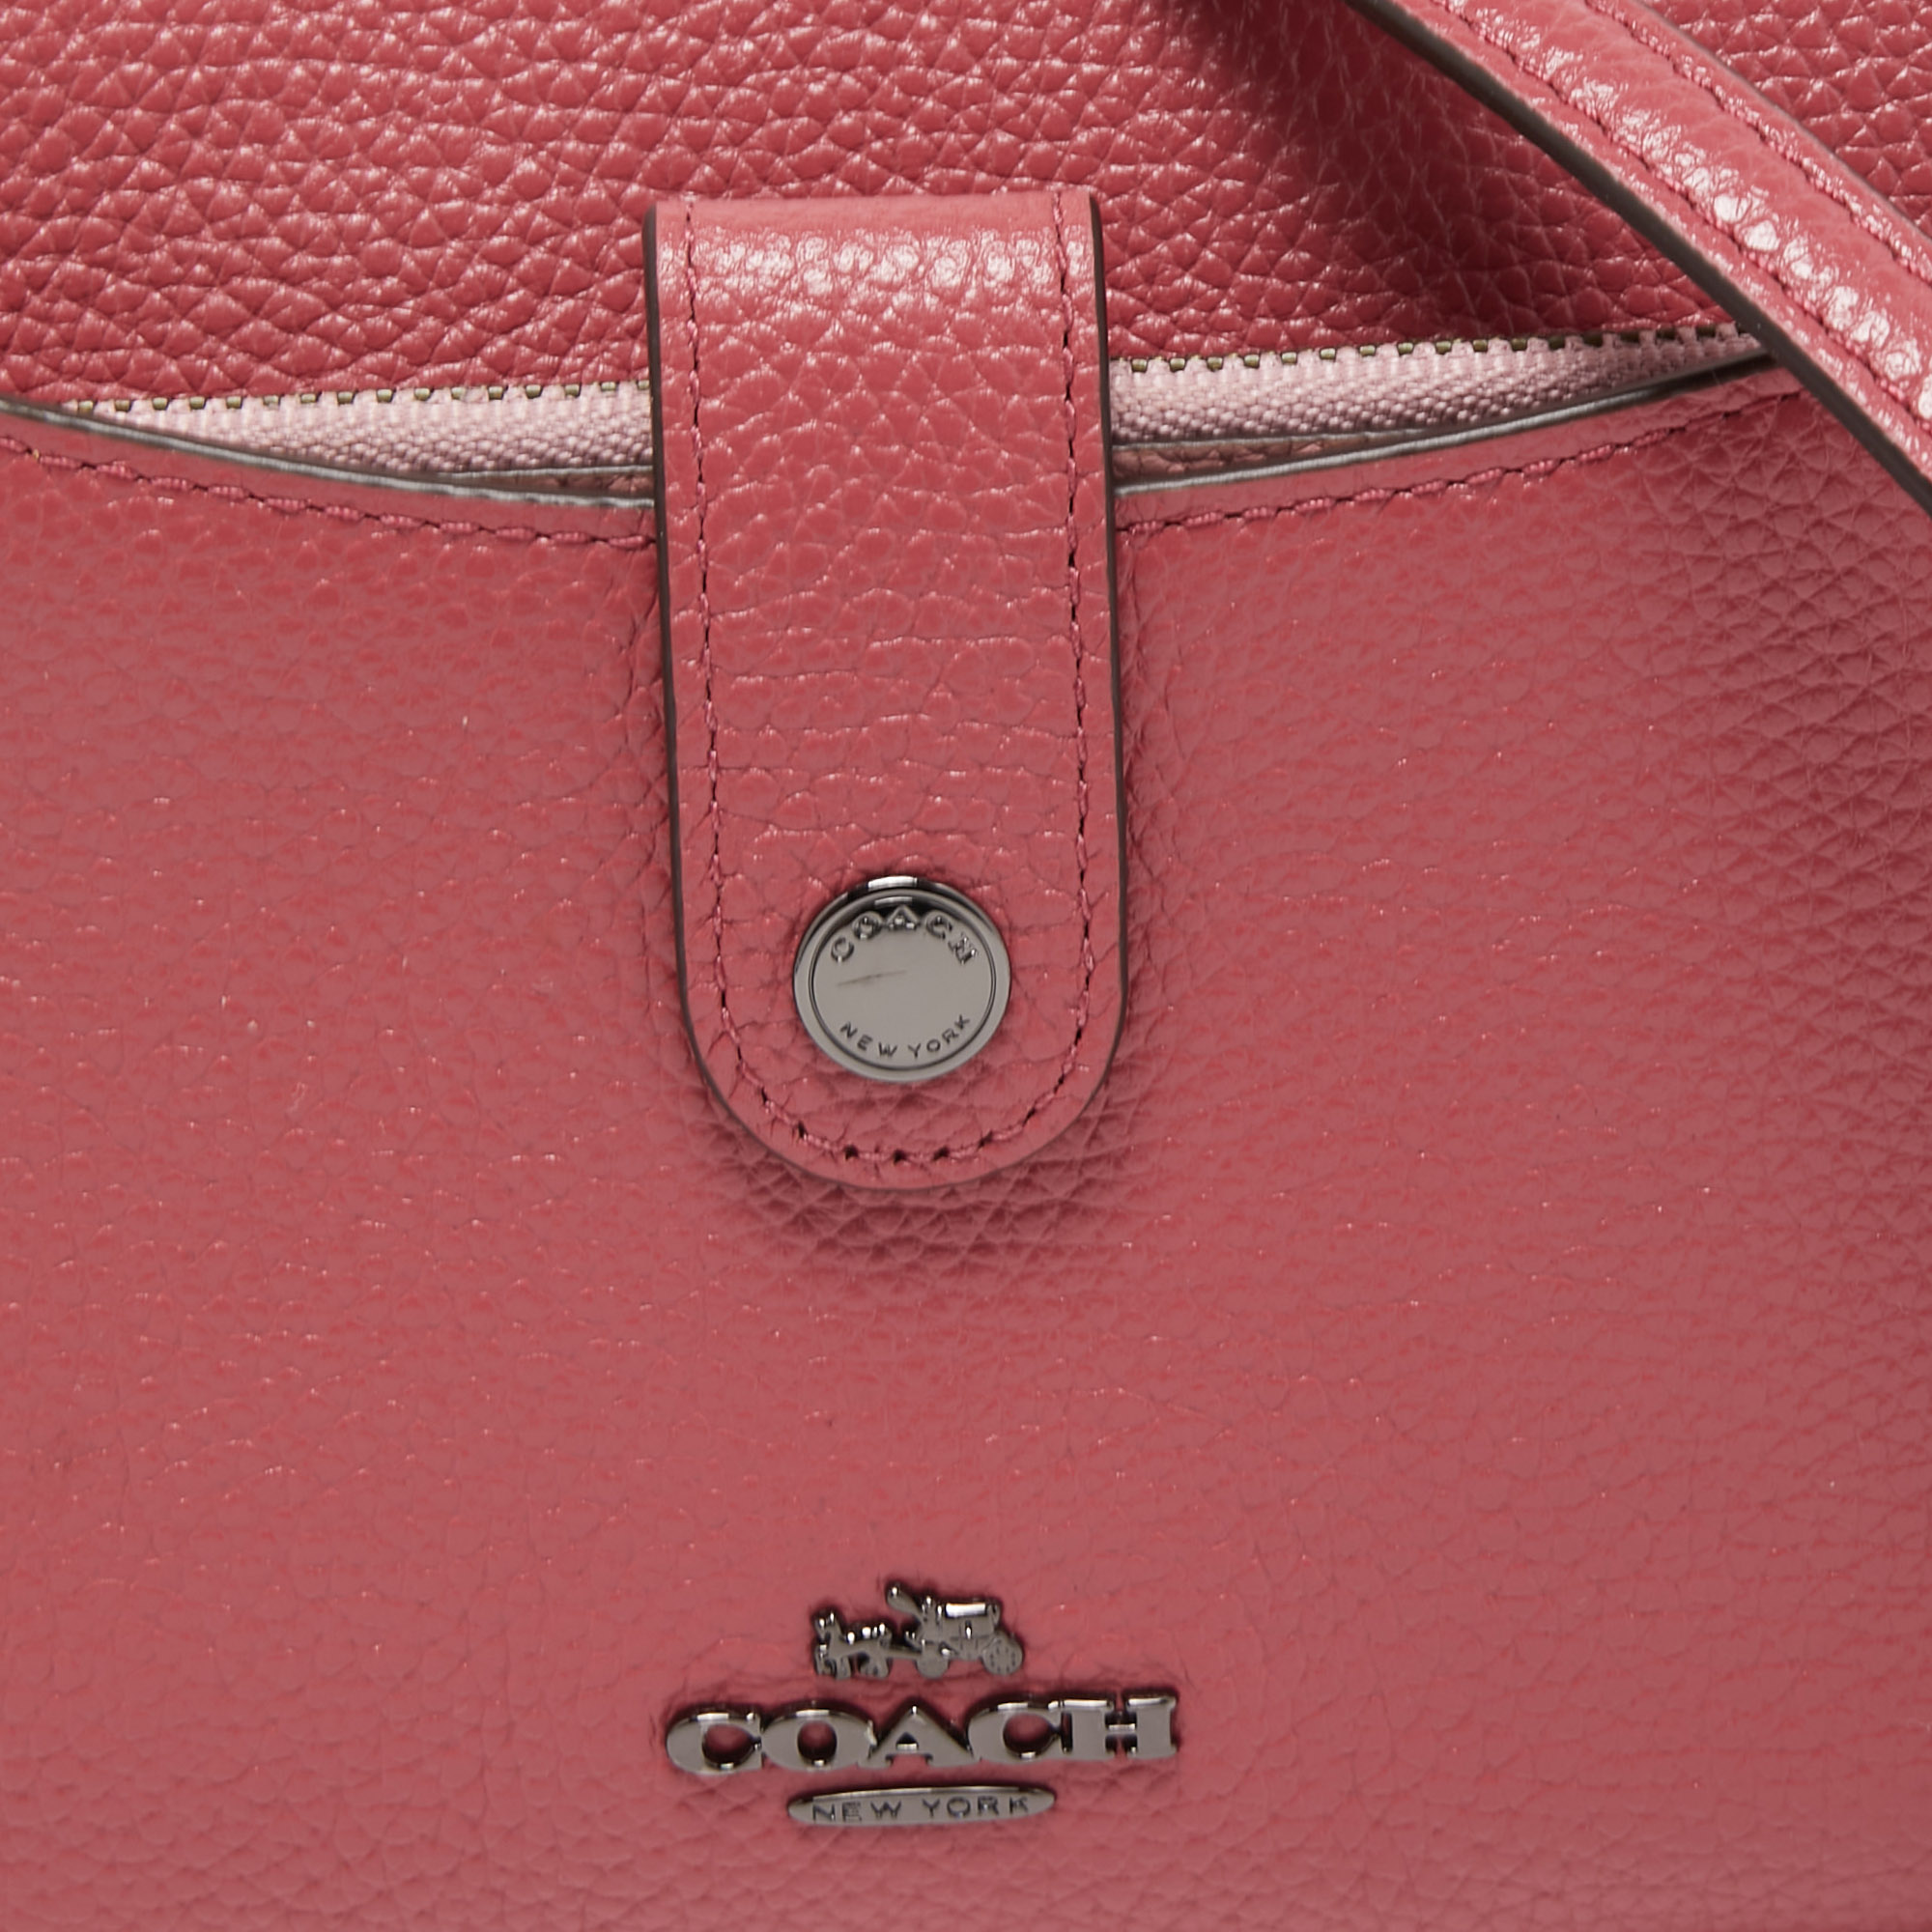 Coach Two Tone Pink Leather Noa Pop Up Crossbody Bag